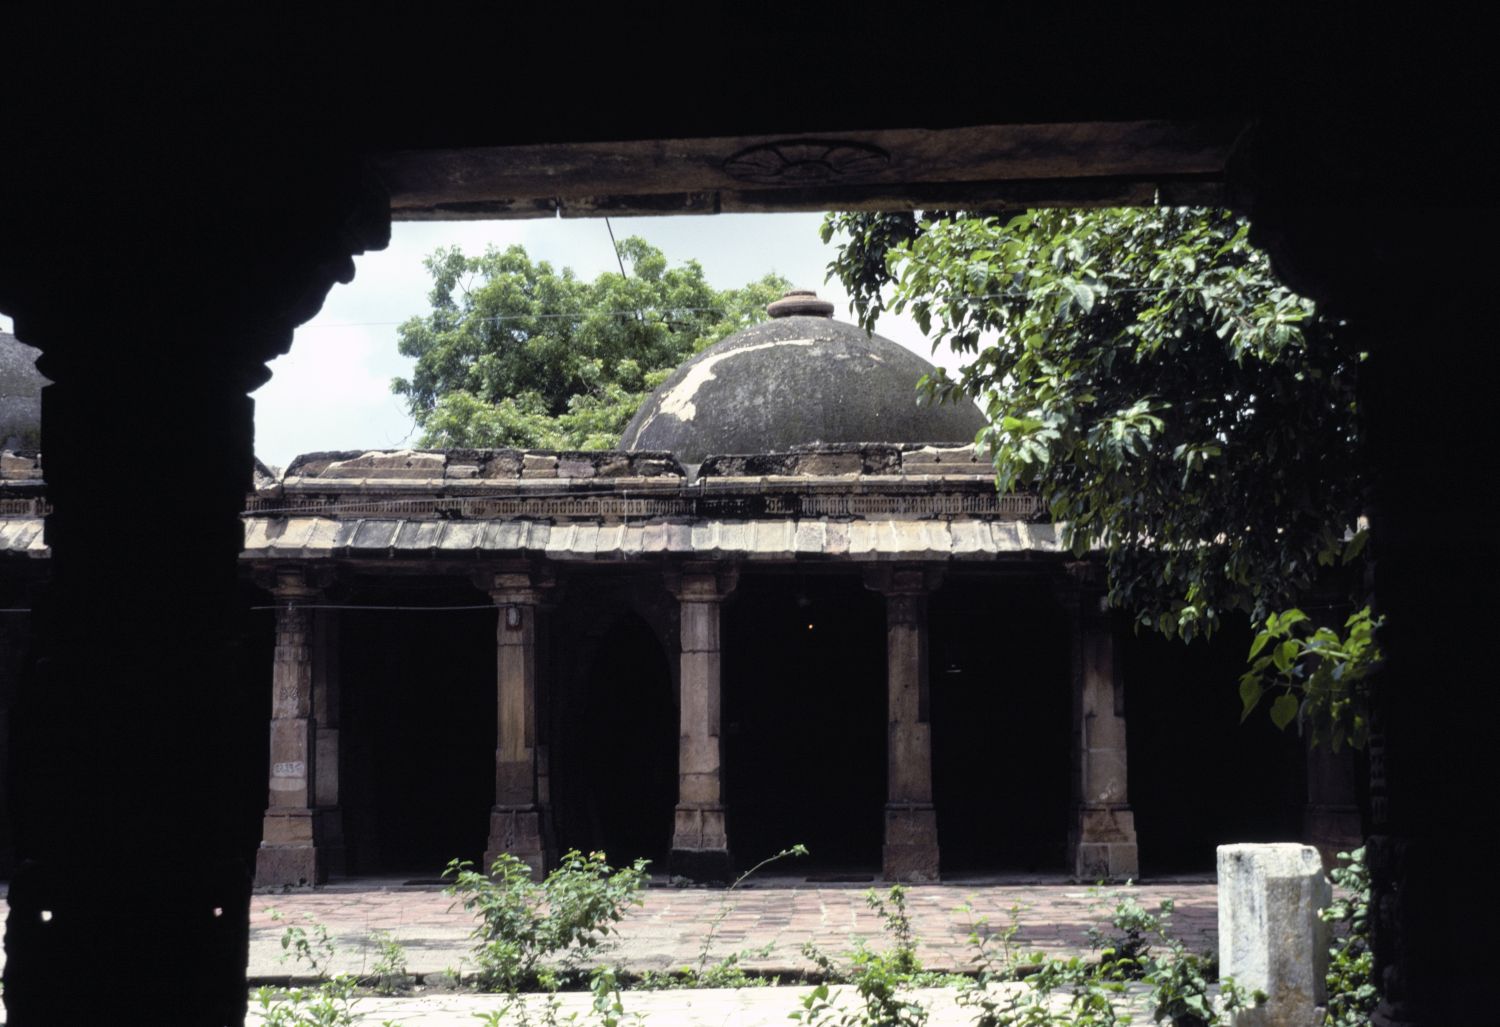 View of east facade from under tomb.